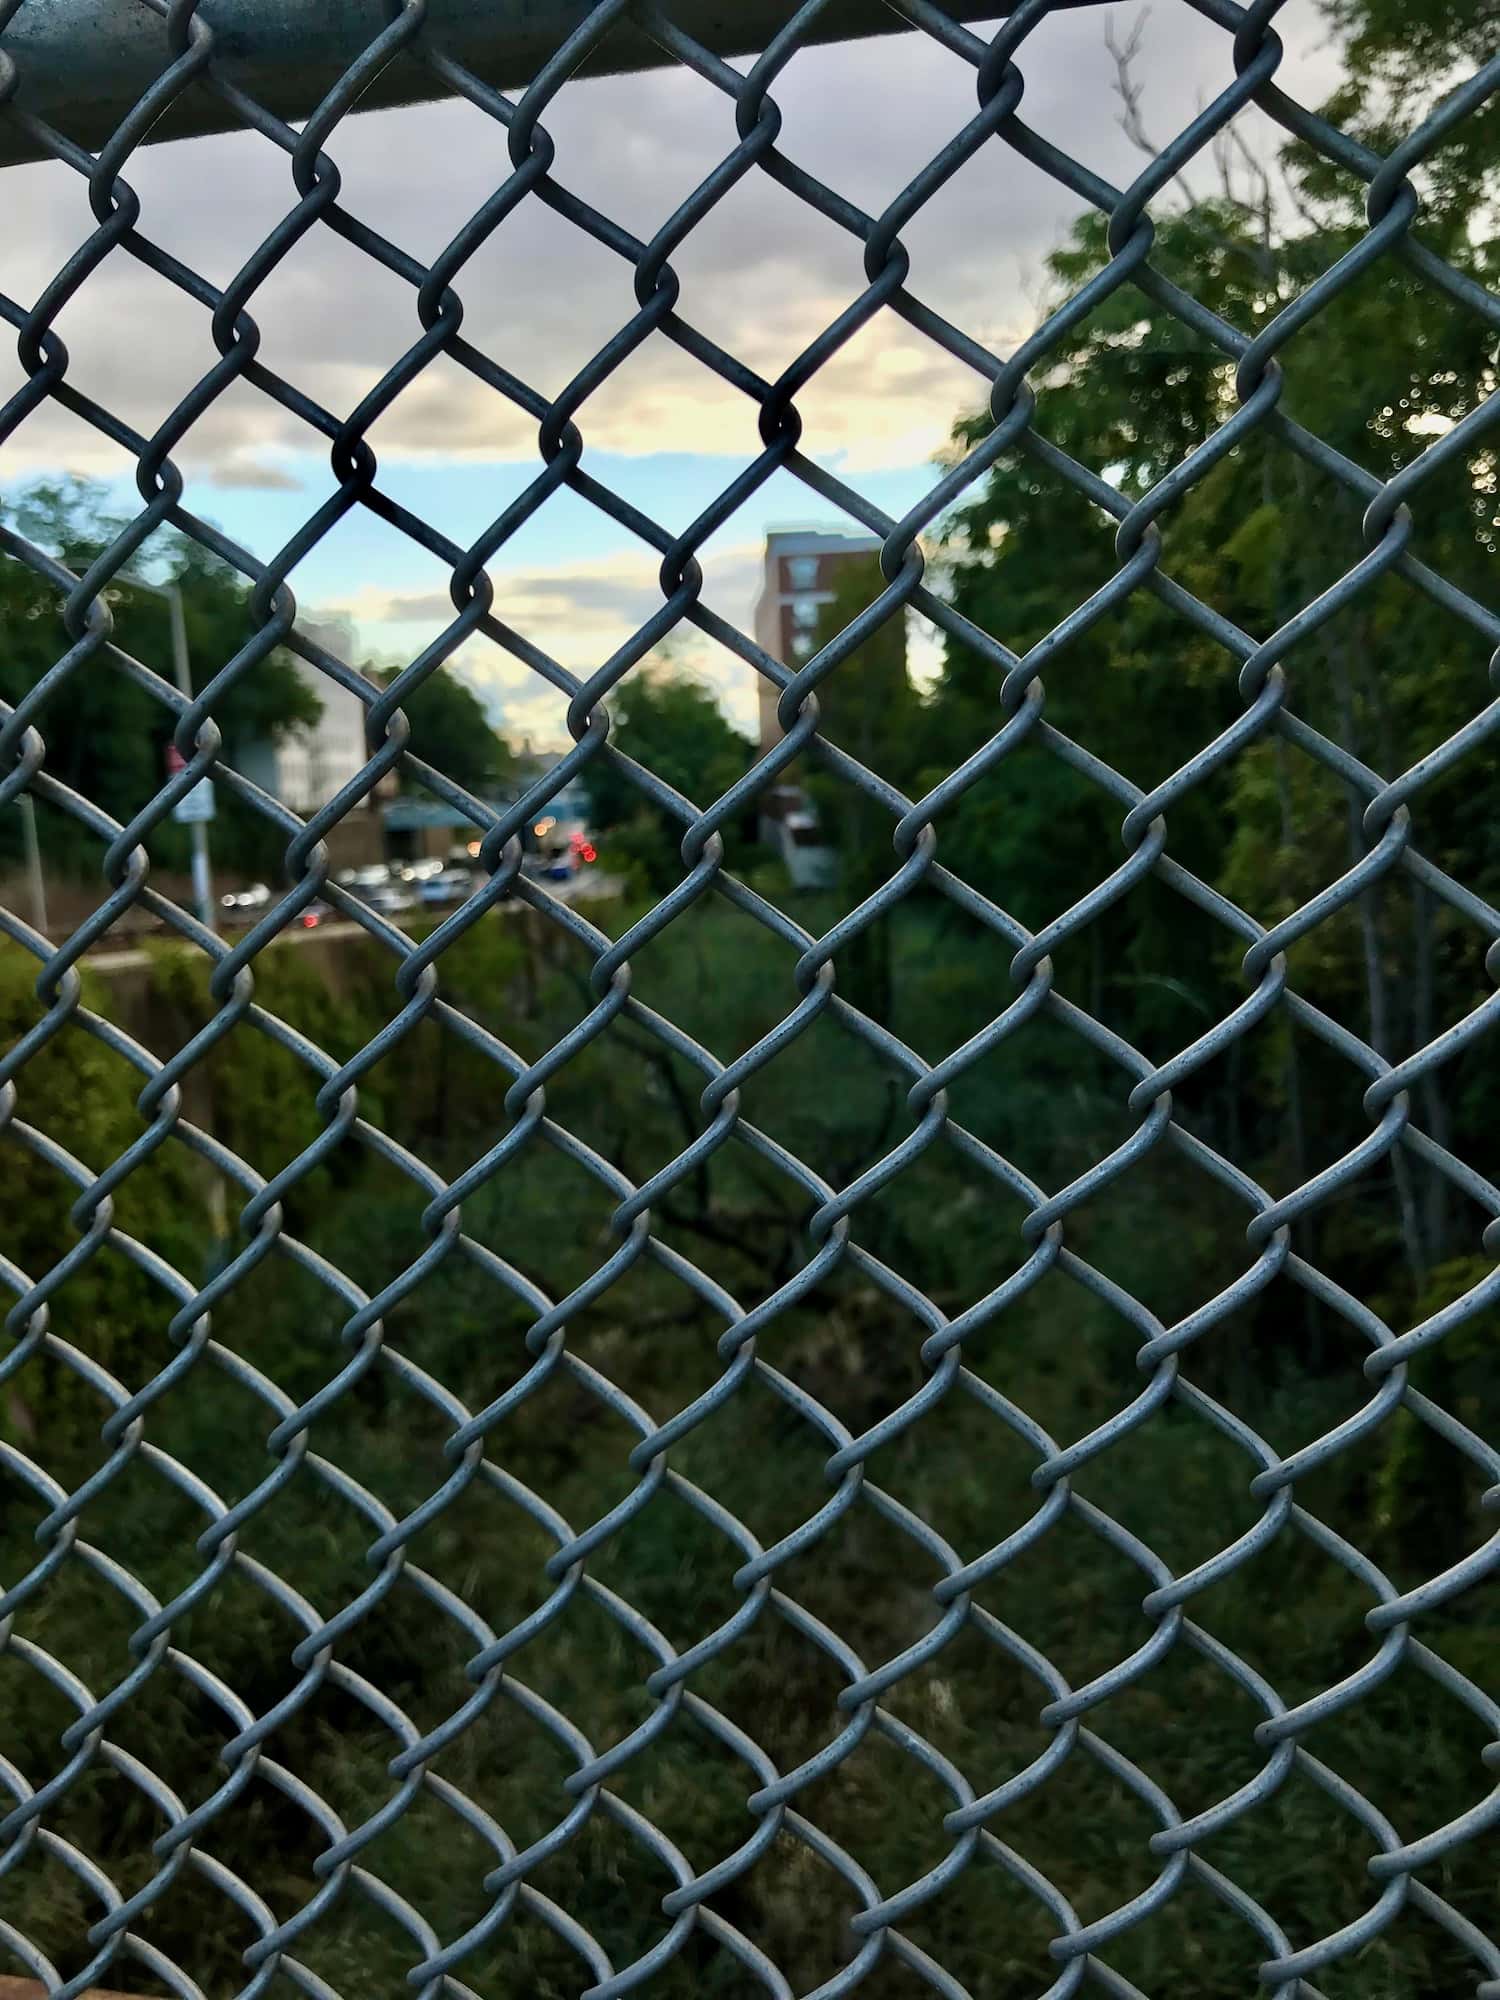 The perspective of Tibbetts Brook's potential path, framed by a chain link fence, emphasizing the separation and potential union of city and nature.